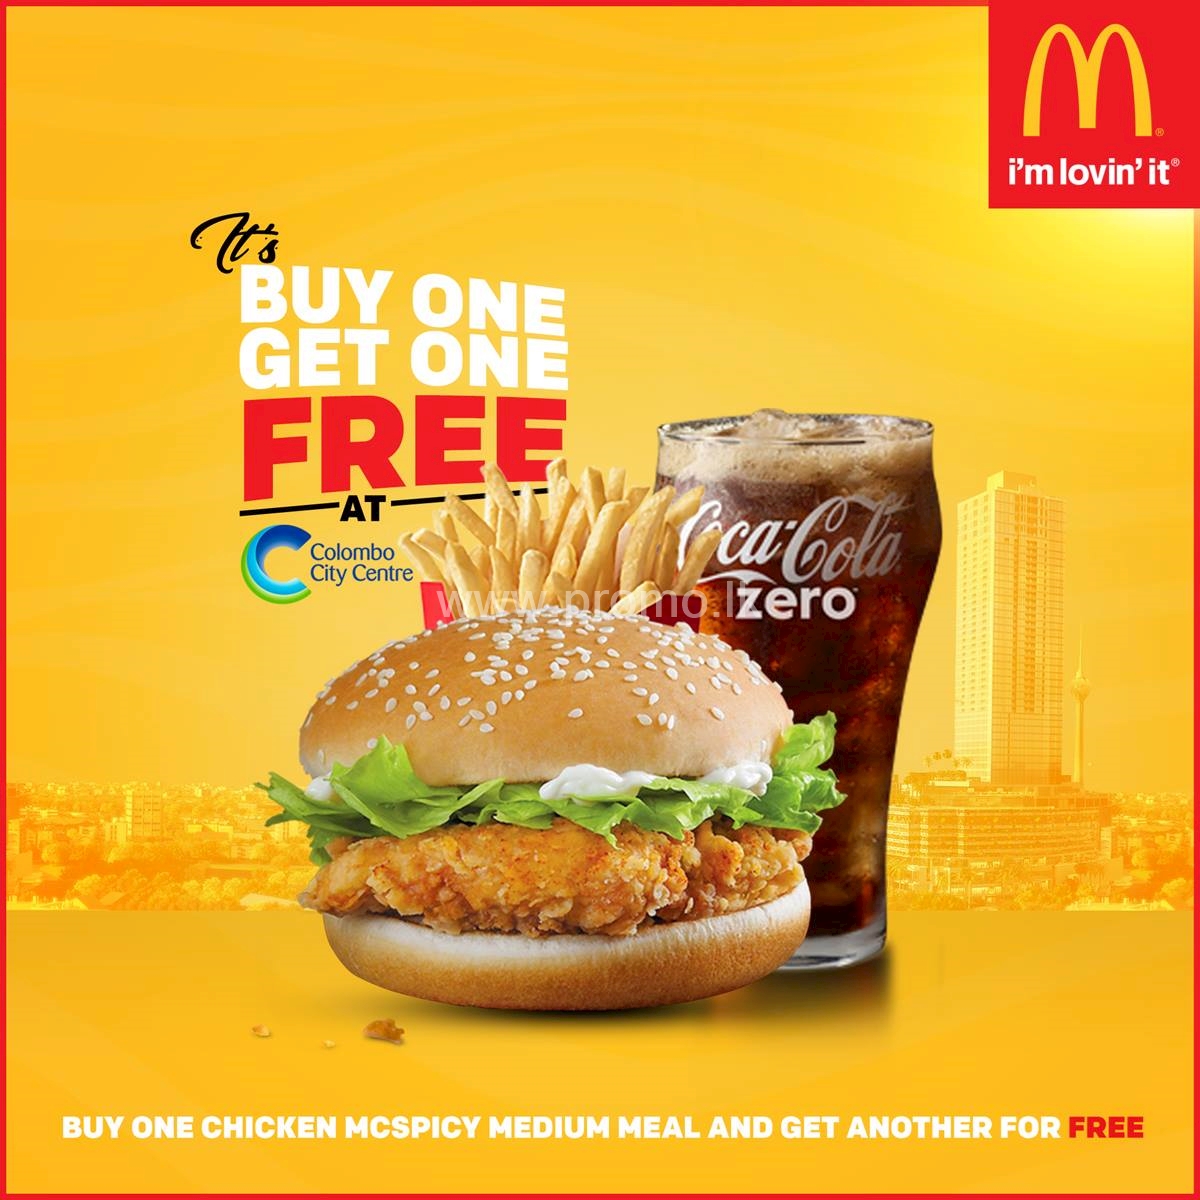 It's Buy 1 Get 1 Free at Colombo City Centre from Mcdonald's